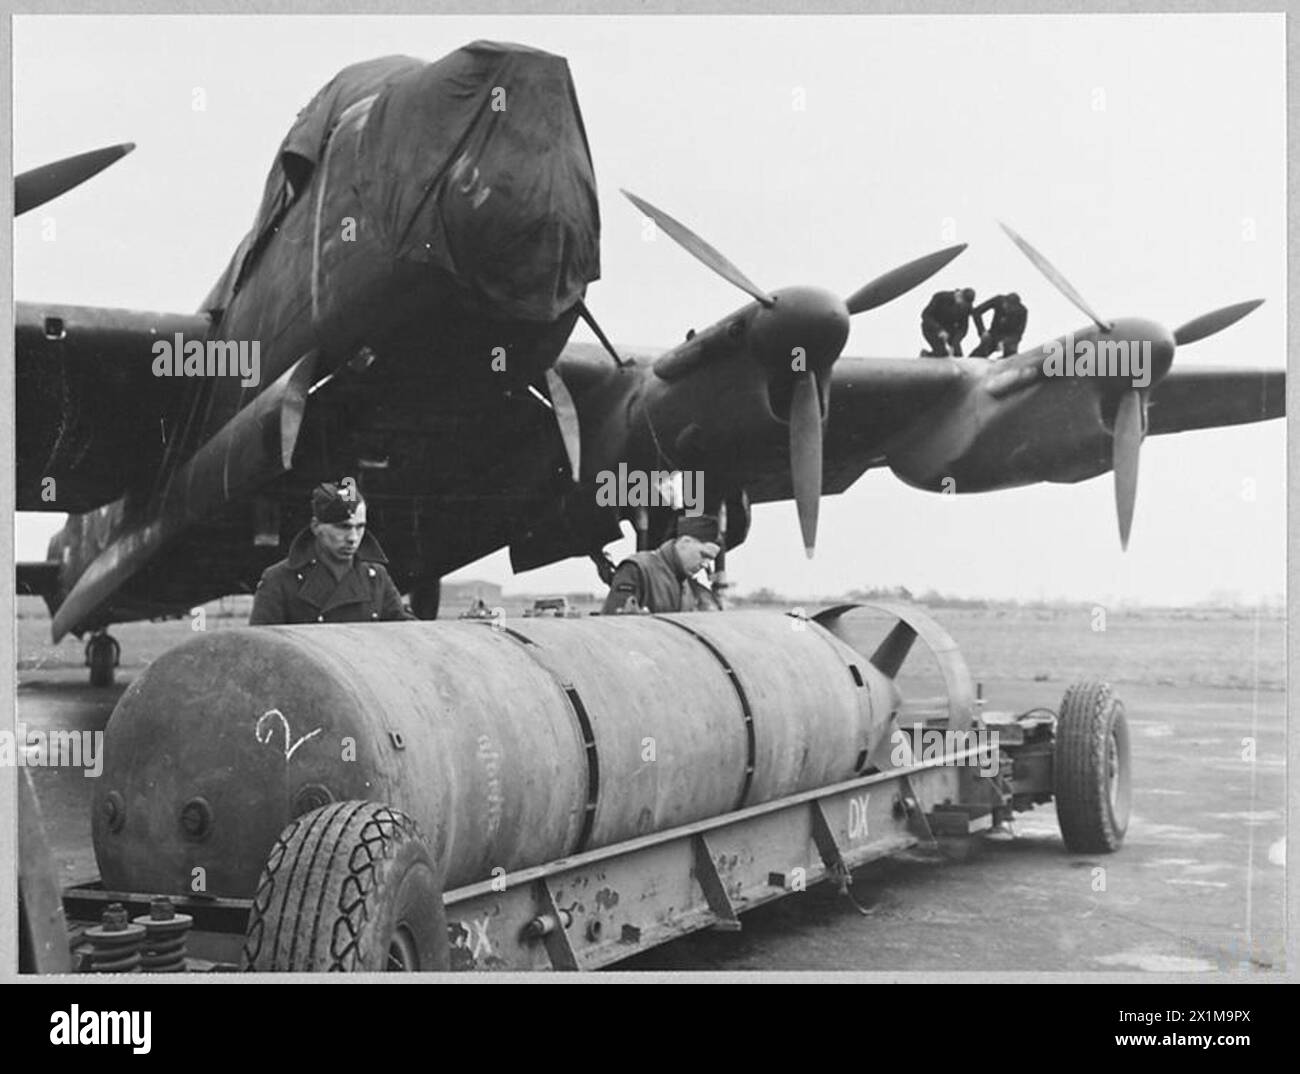 R.A.F's 12,000 LB. BOMB : - 12450 Picture (issued 1944) shows - Preparing to load a 12,000 lb. bomb on to a waiting Lancaster, Royal Air Force Stock Photo